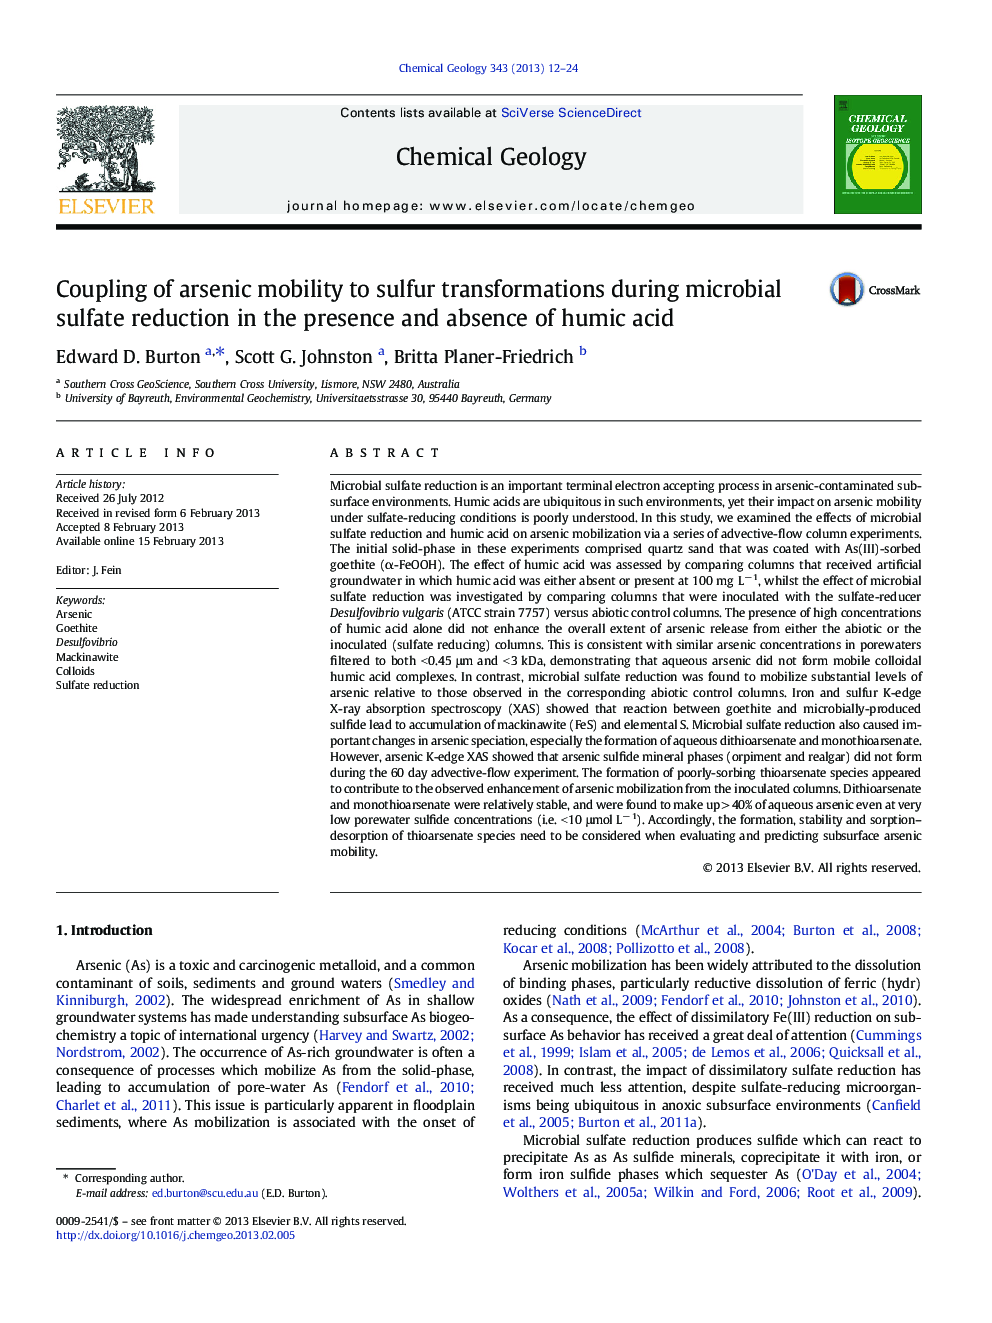 Coupling of arsenic mobility to sulfur transformations during microbial sulfate reduction in the presence and absence of humic acid